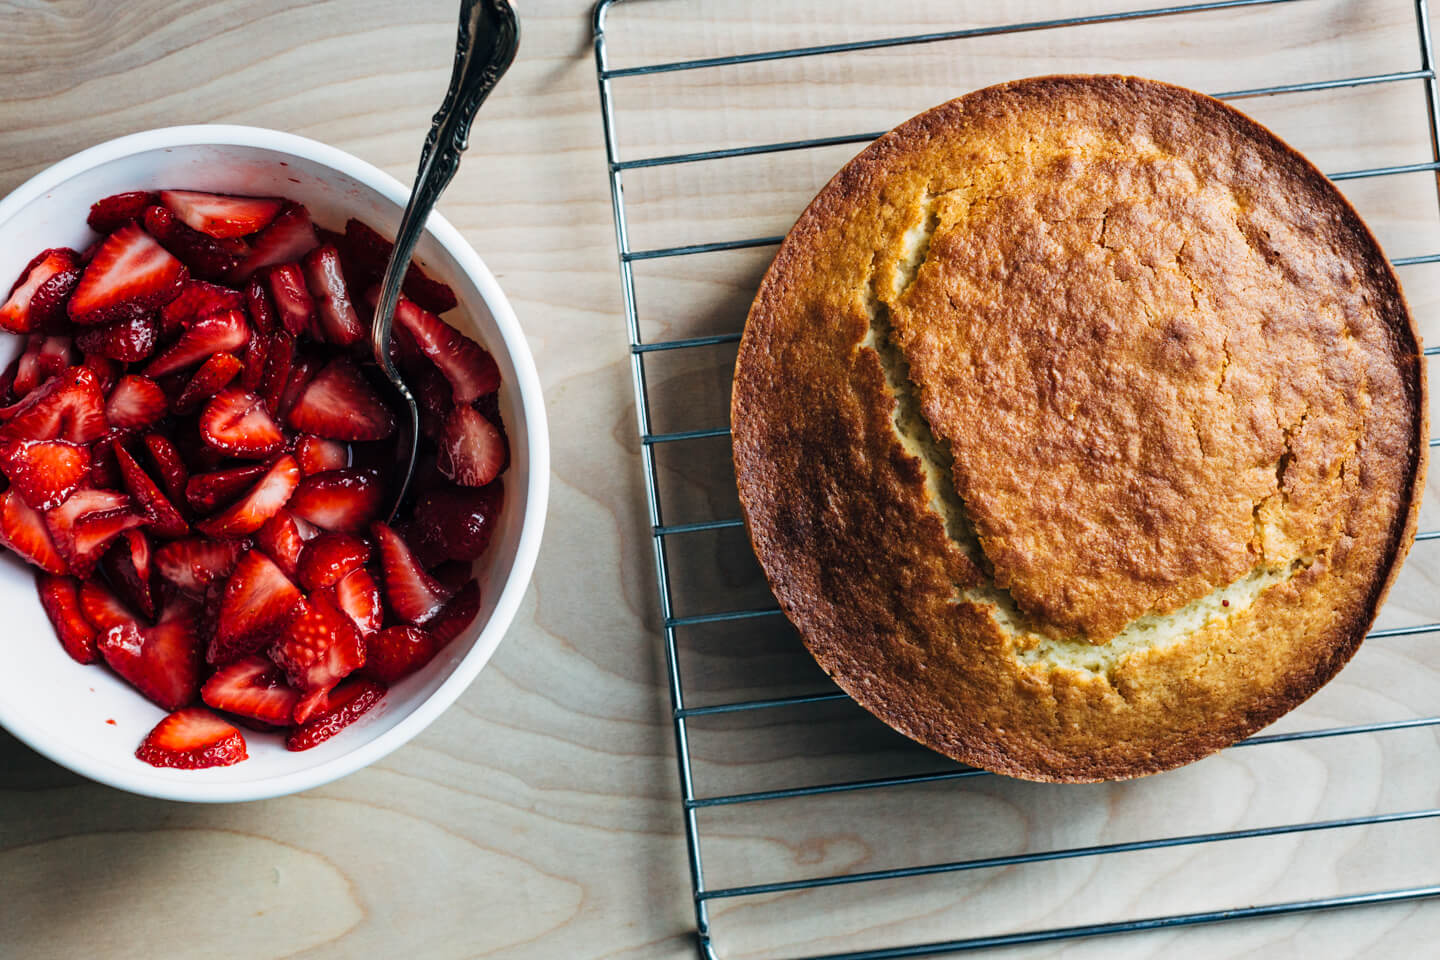 From Melissa Coleman's new book The Minimalist Kitchen, a delightfully simple strawberry yogurt shortcake that's easy enough to bake on a weeknight. 